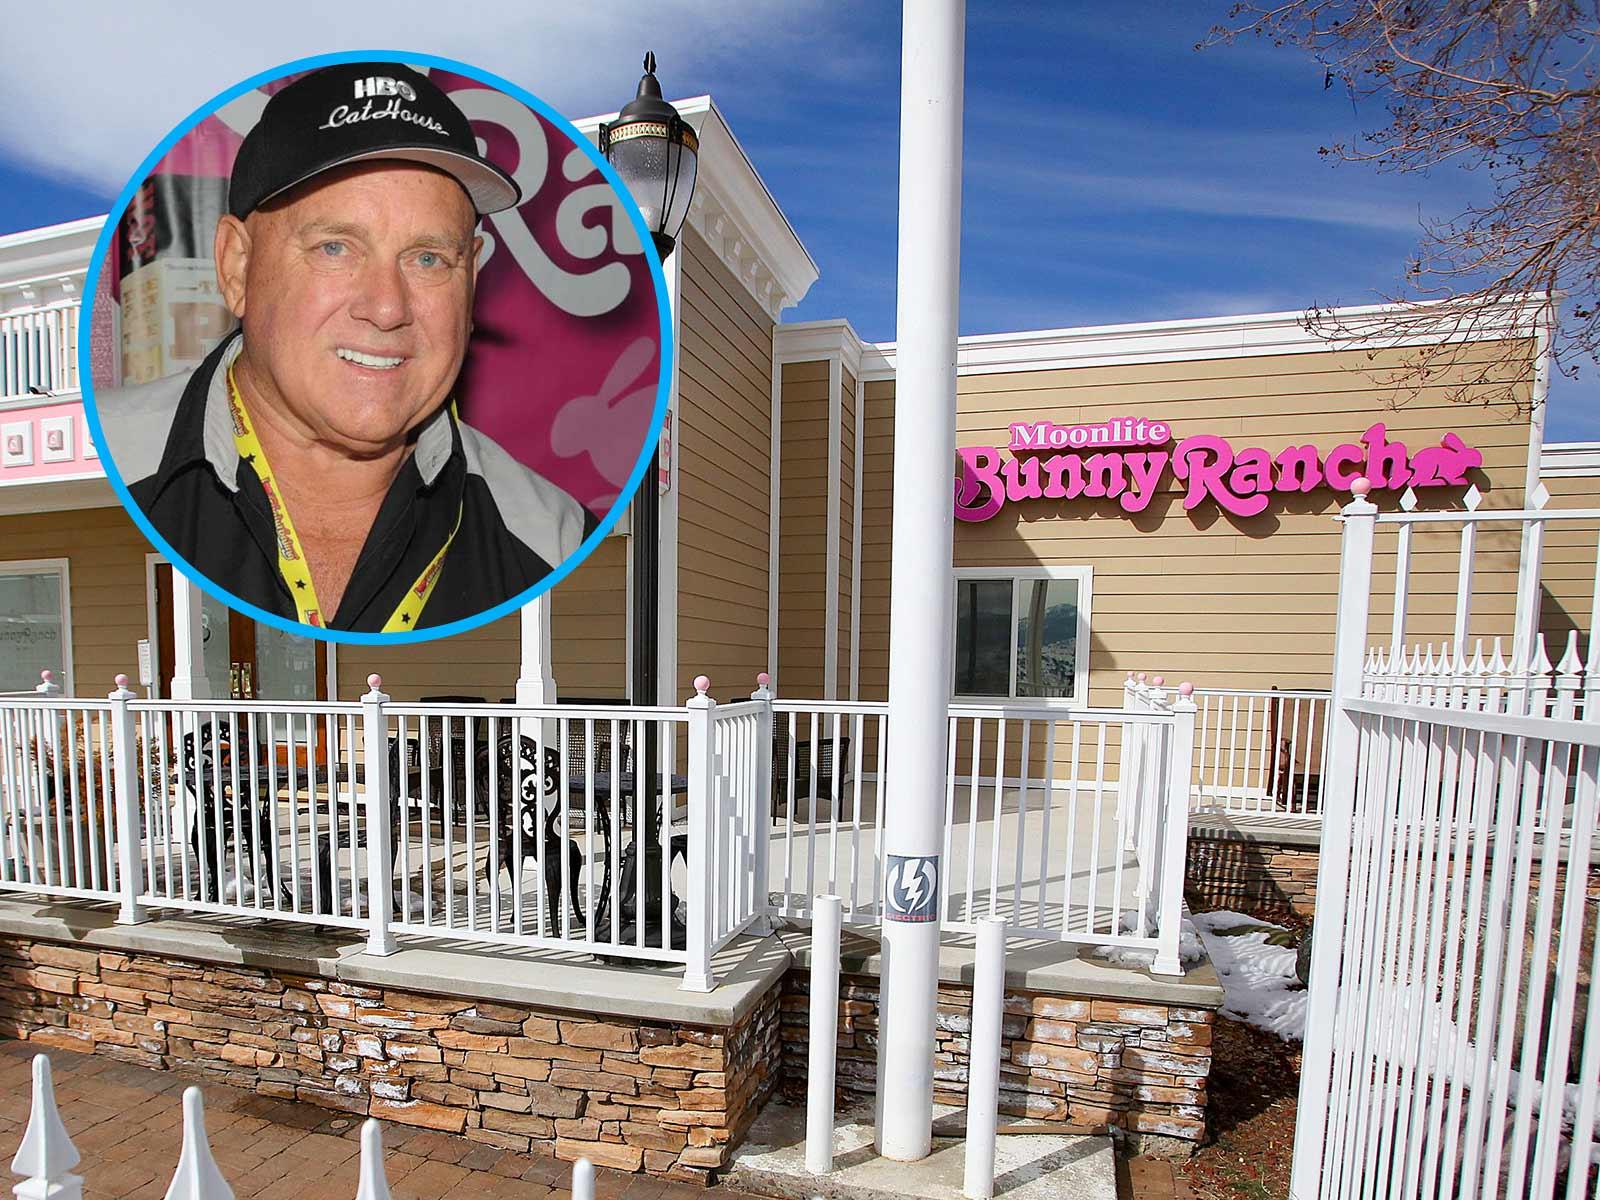 Fate of the Bunny Ranch Brothel Uncertain After Dennis Hof’s Death